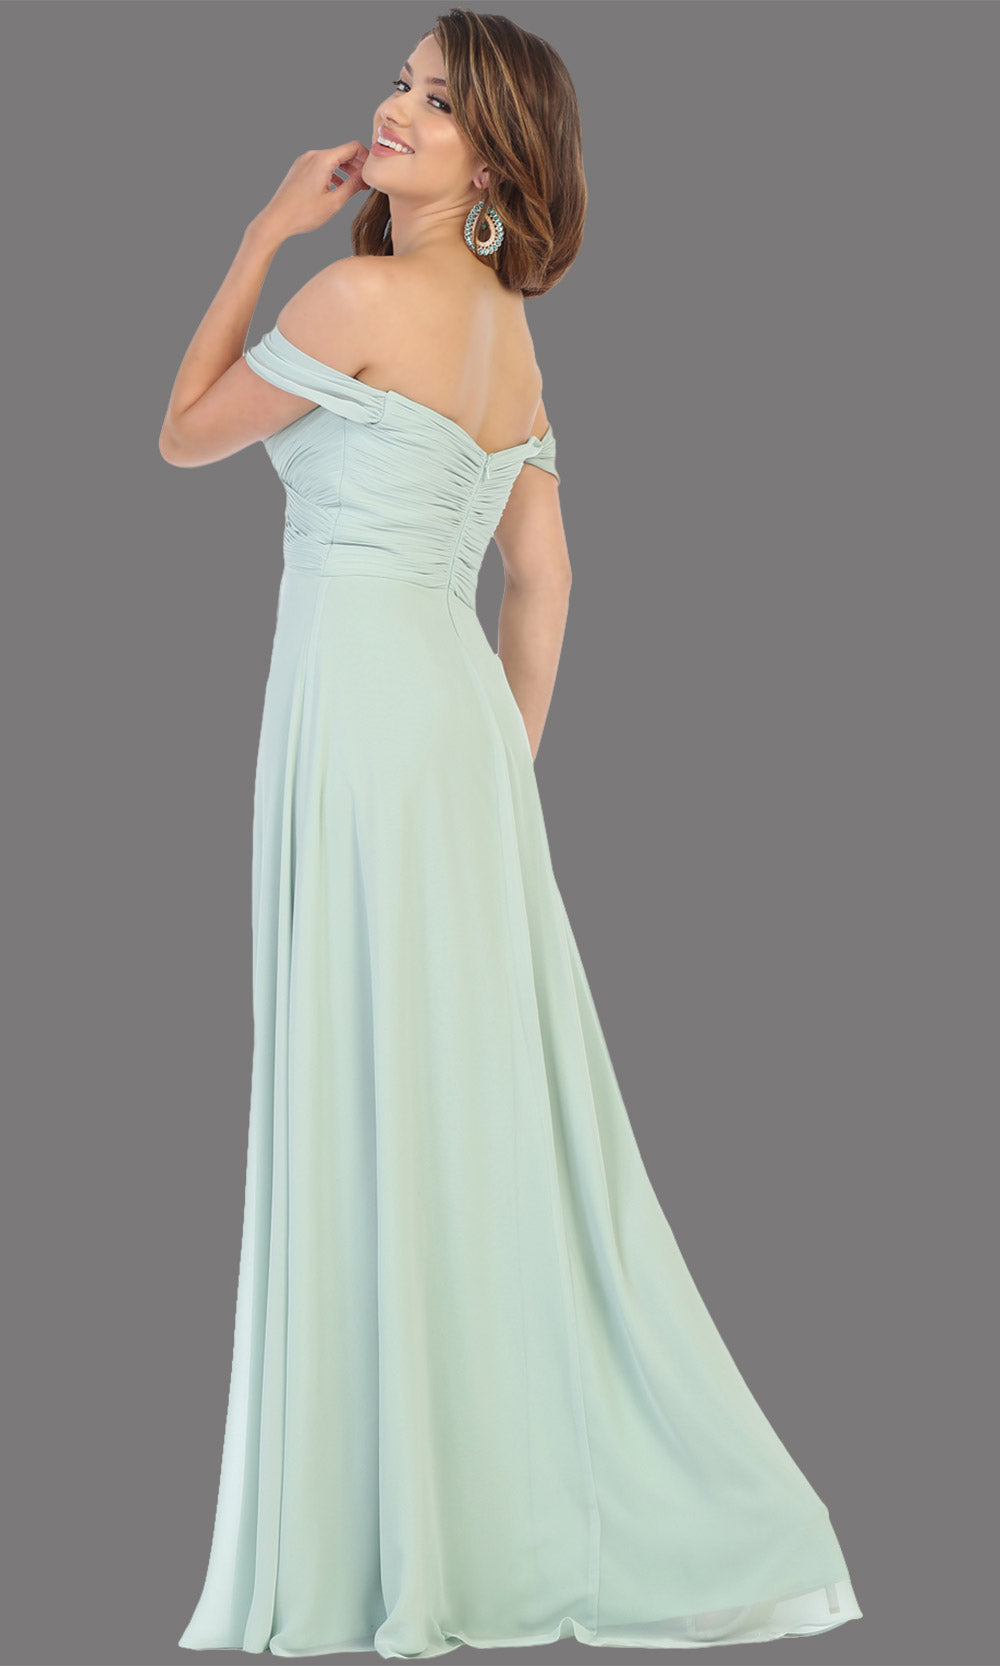 Mayqueen MQ1711 long sage green flowy off shoulder dress. This light green dress is perfect for bridesmaid dresses, simple wedding guest dress, prom dress, gala, black tie wedding. Plus sizes are available, evening party dress-b.jpg